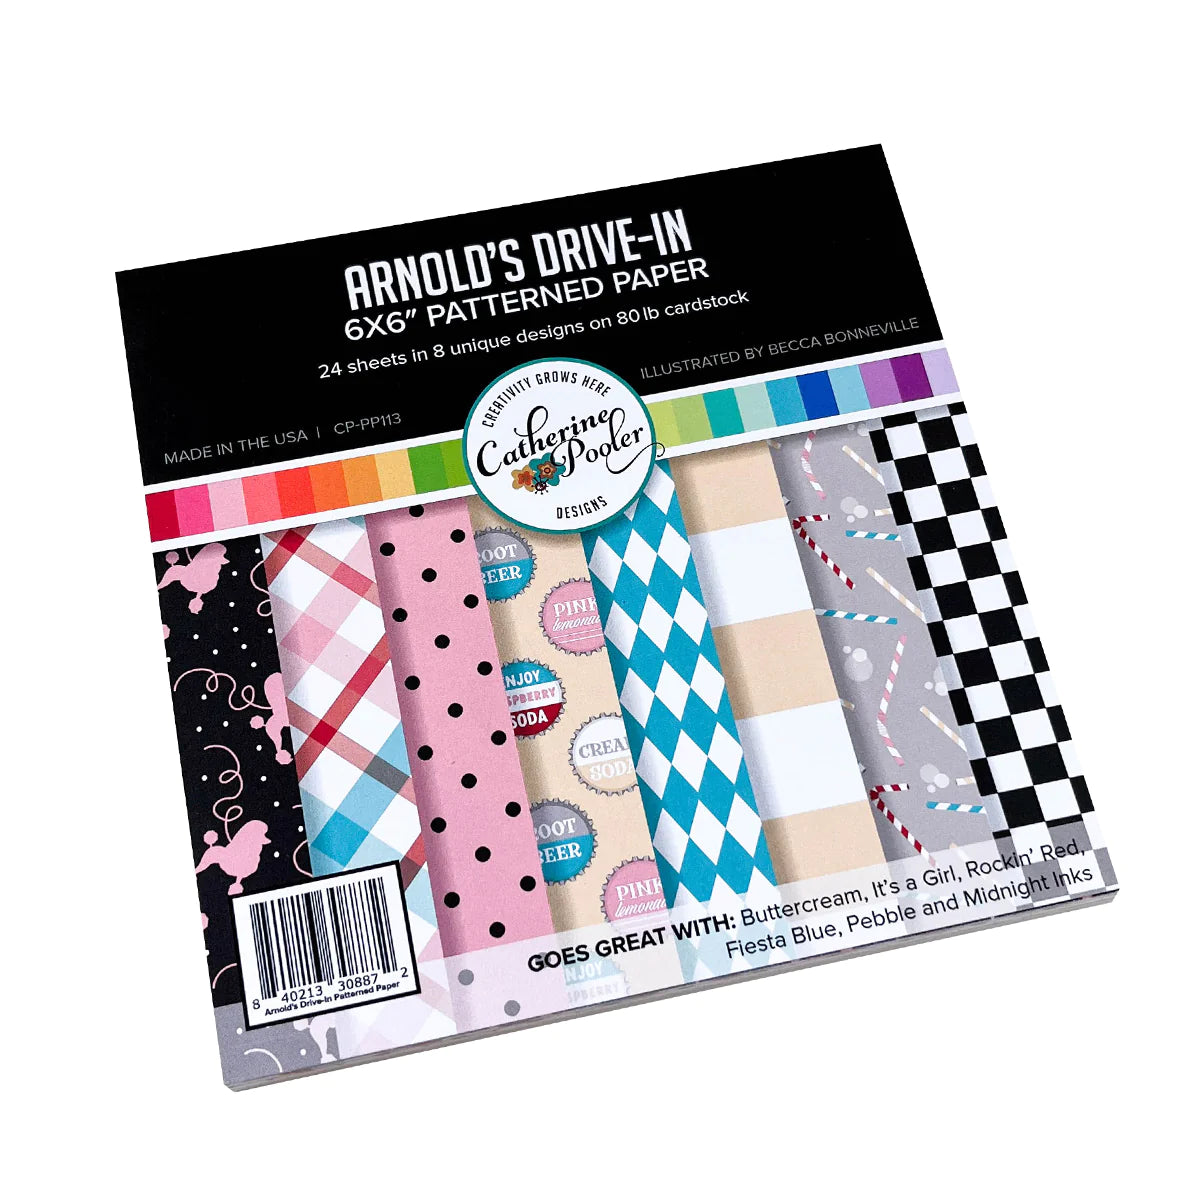 Arnold's Drive-In 6x6 Patterned Paper Pad